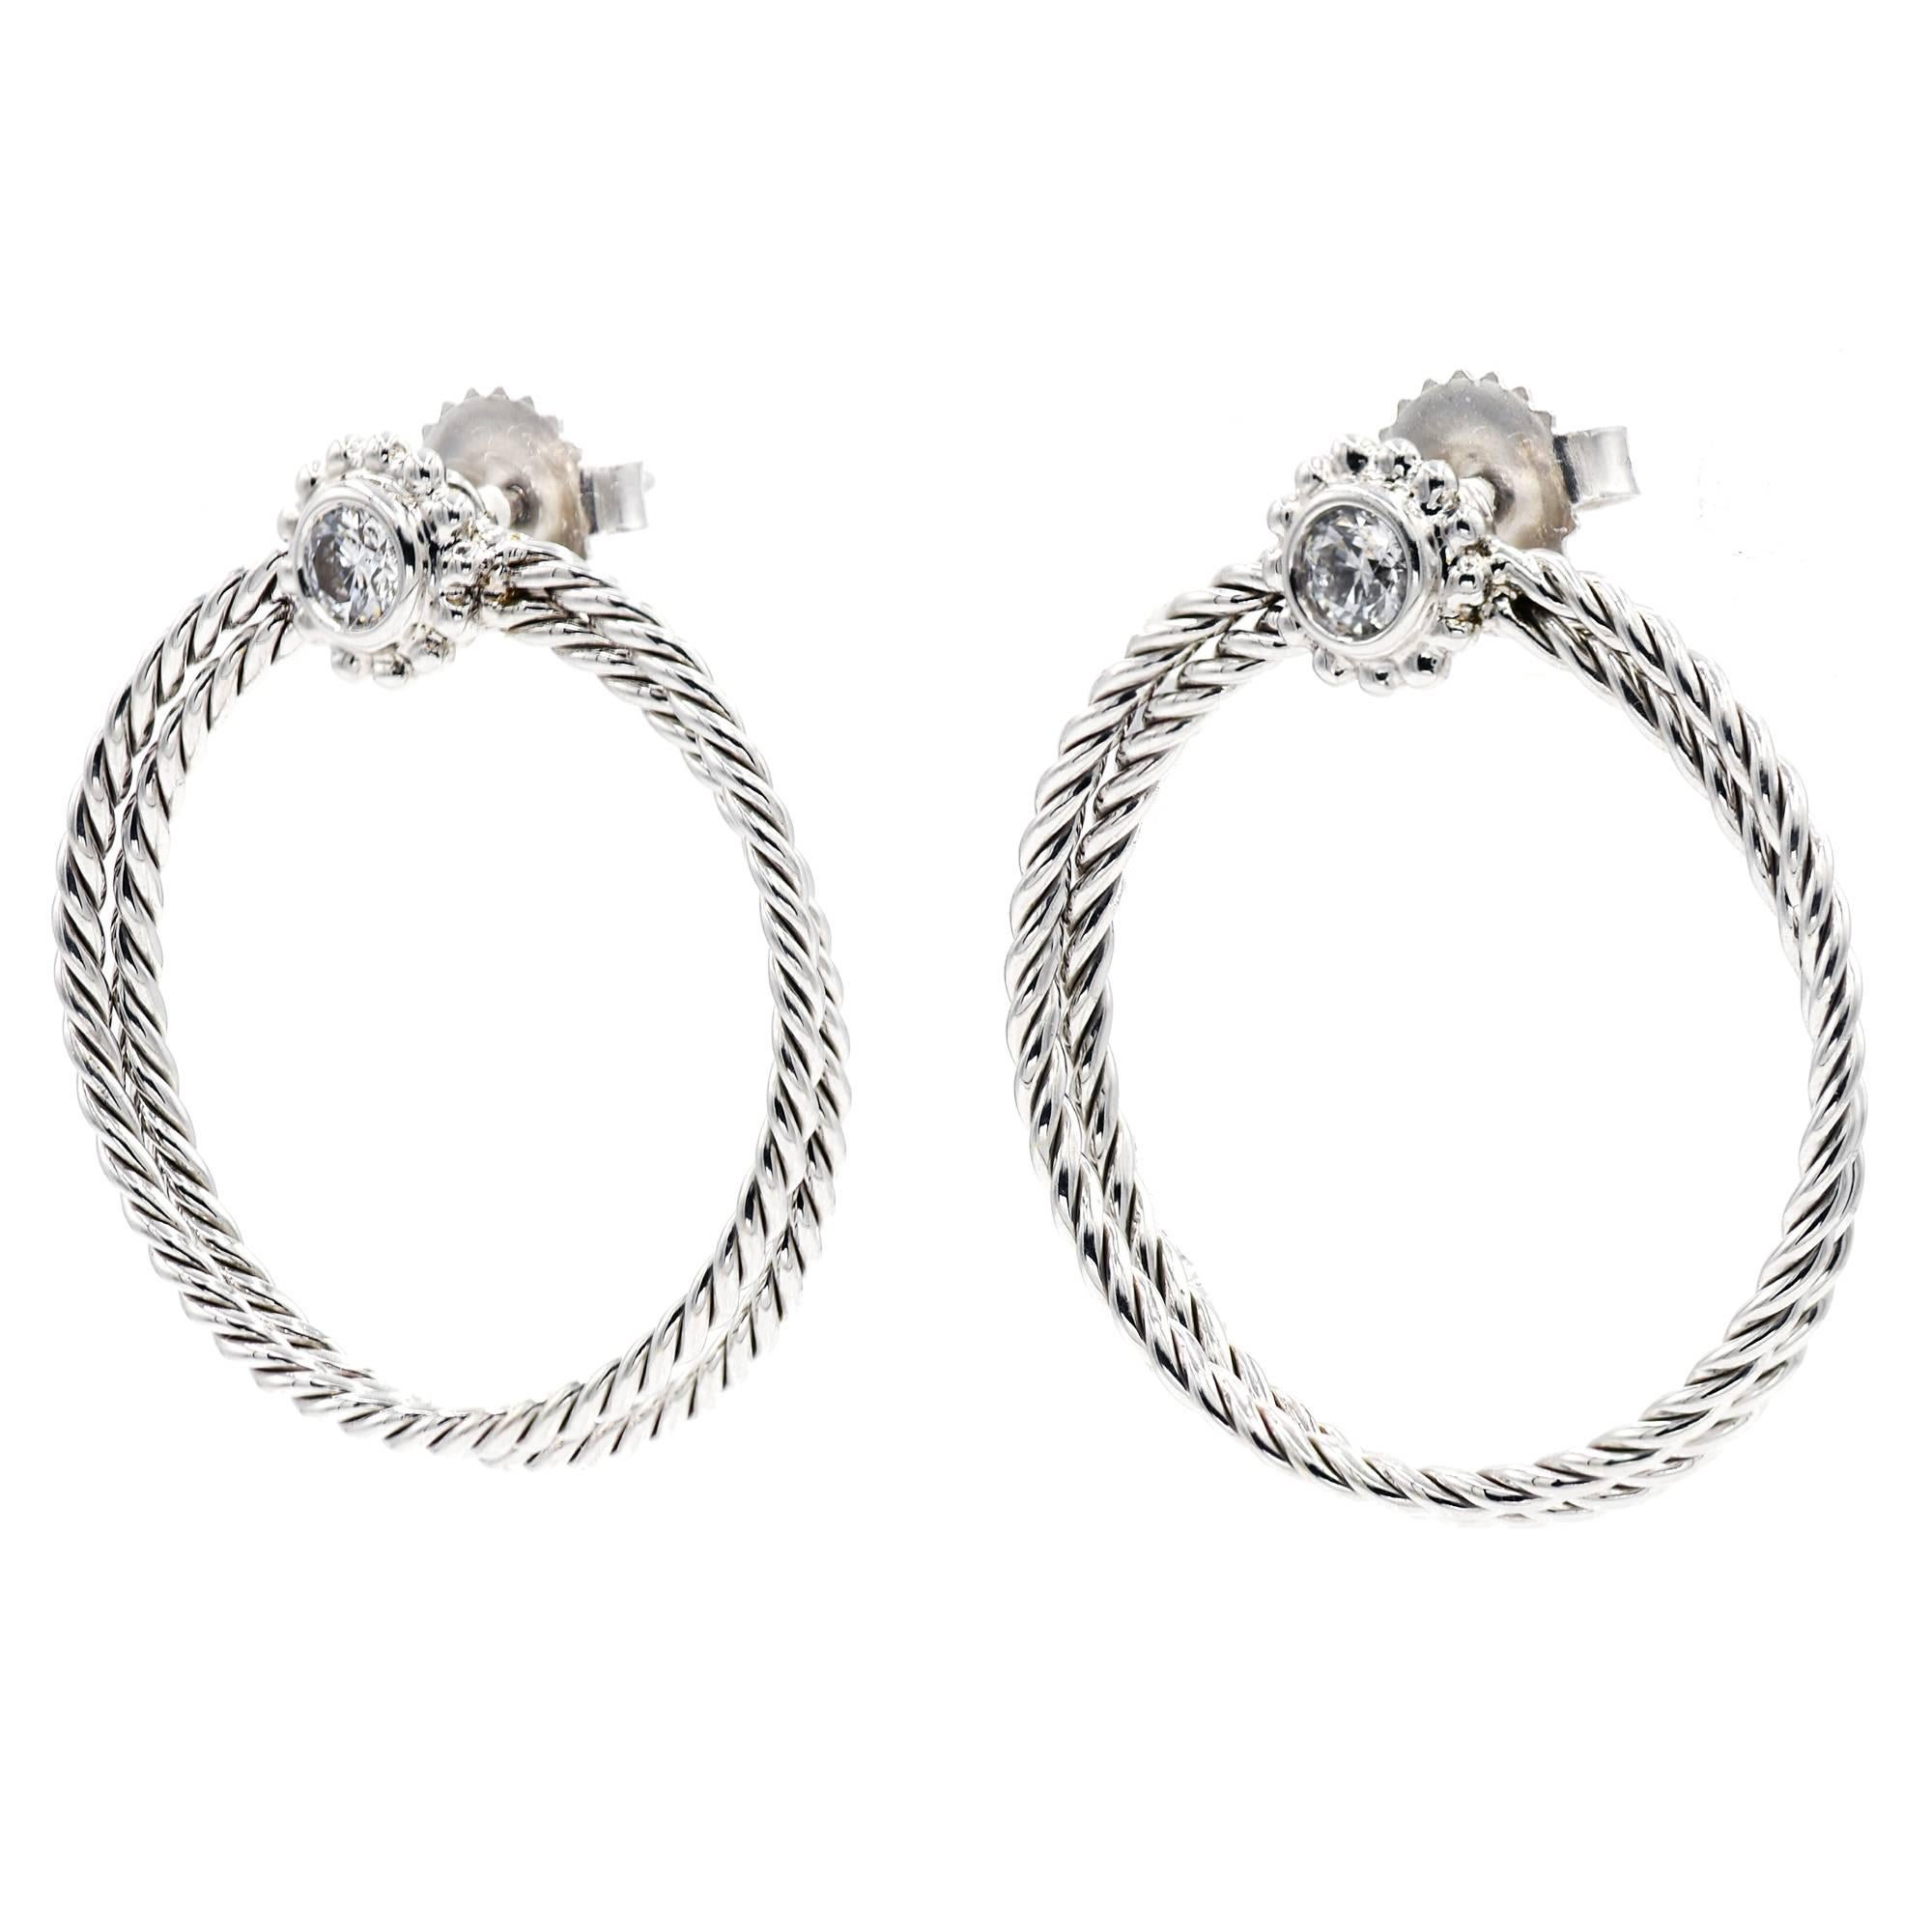 Bielka Diamond 18k white gold twisted wire hoop earrings with .30cts total of bright sparkly Diamonds.

2 round full cut Diamonds, approx. total weight .30cts, F, VS
18k white gold
Tested and stamped: 18k
Hallmark: Bielka
8.3 grams
Top to bottom: